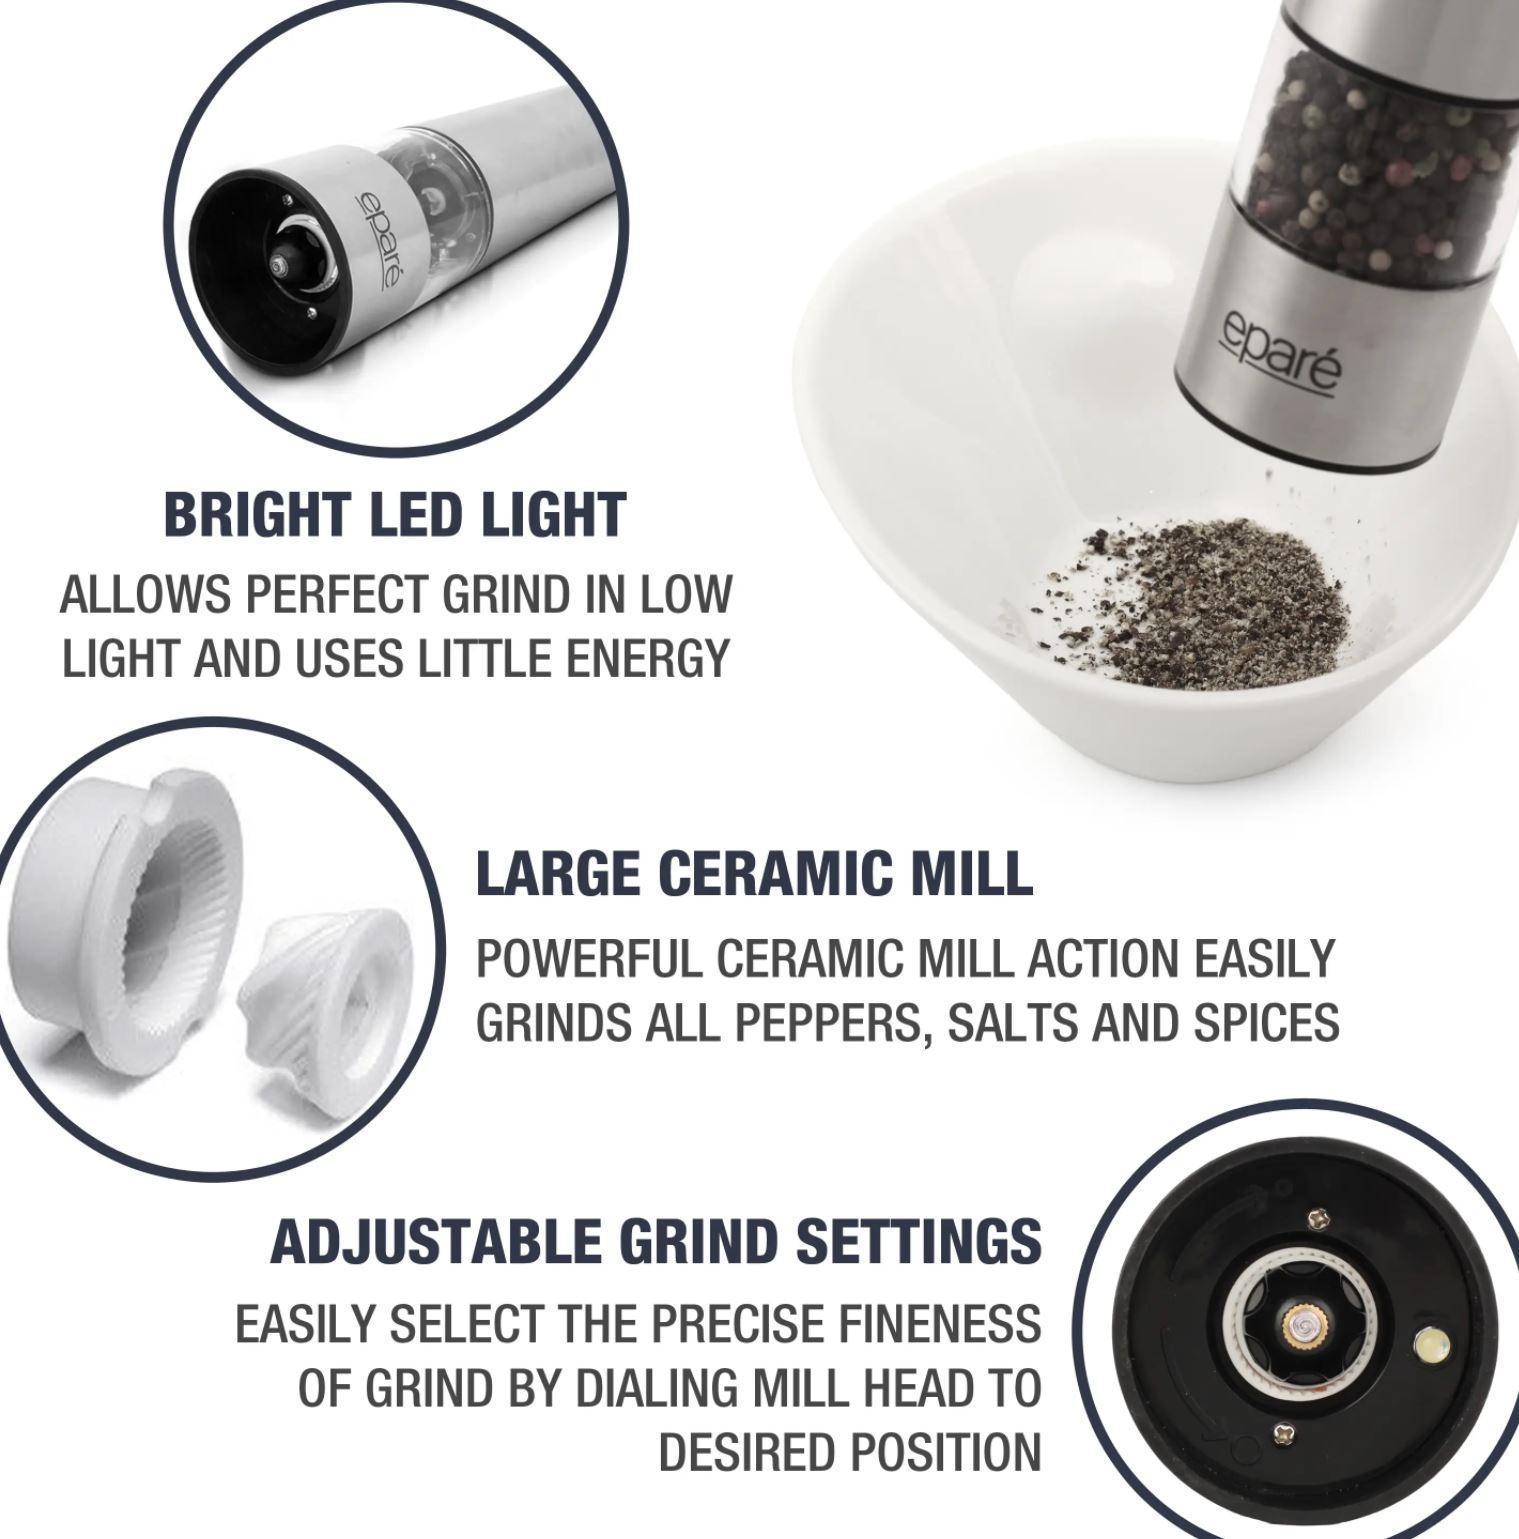 Electric Salt or Pepper Grinder - Battery Operated Ceramic Burr Peppermill Shaker - Automatic Stainless Steel Grinders - Mill with LED Light by Eparé